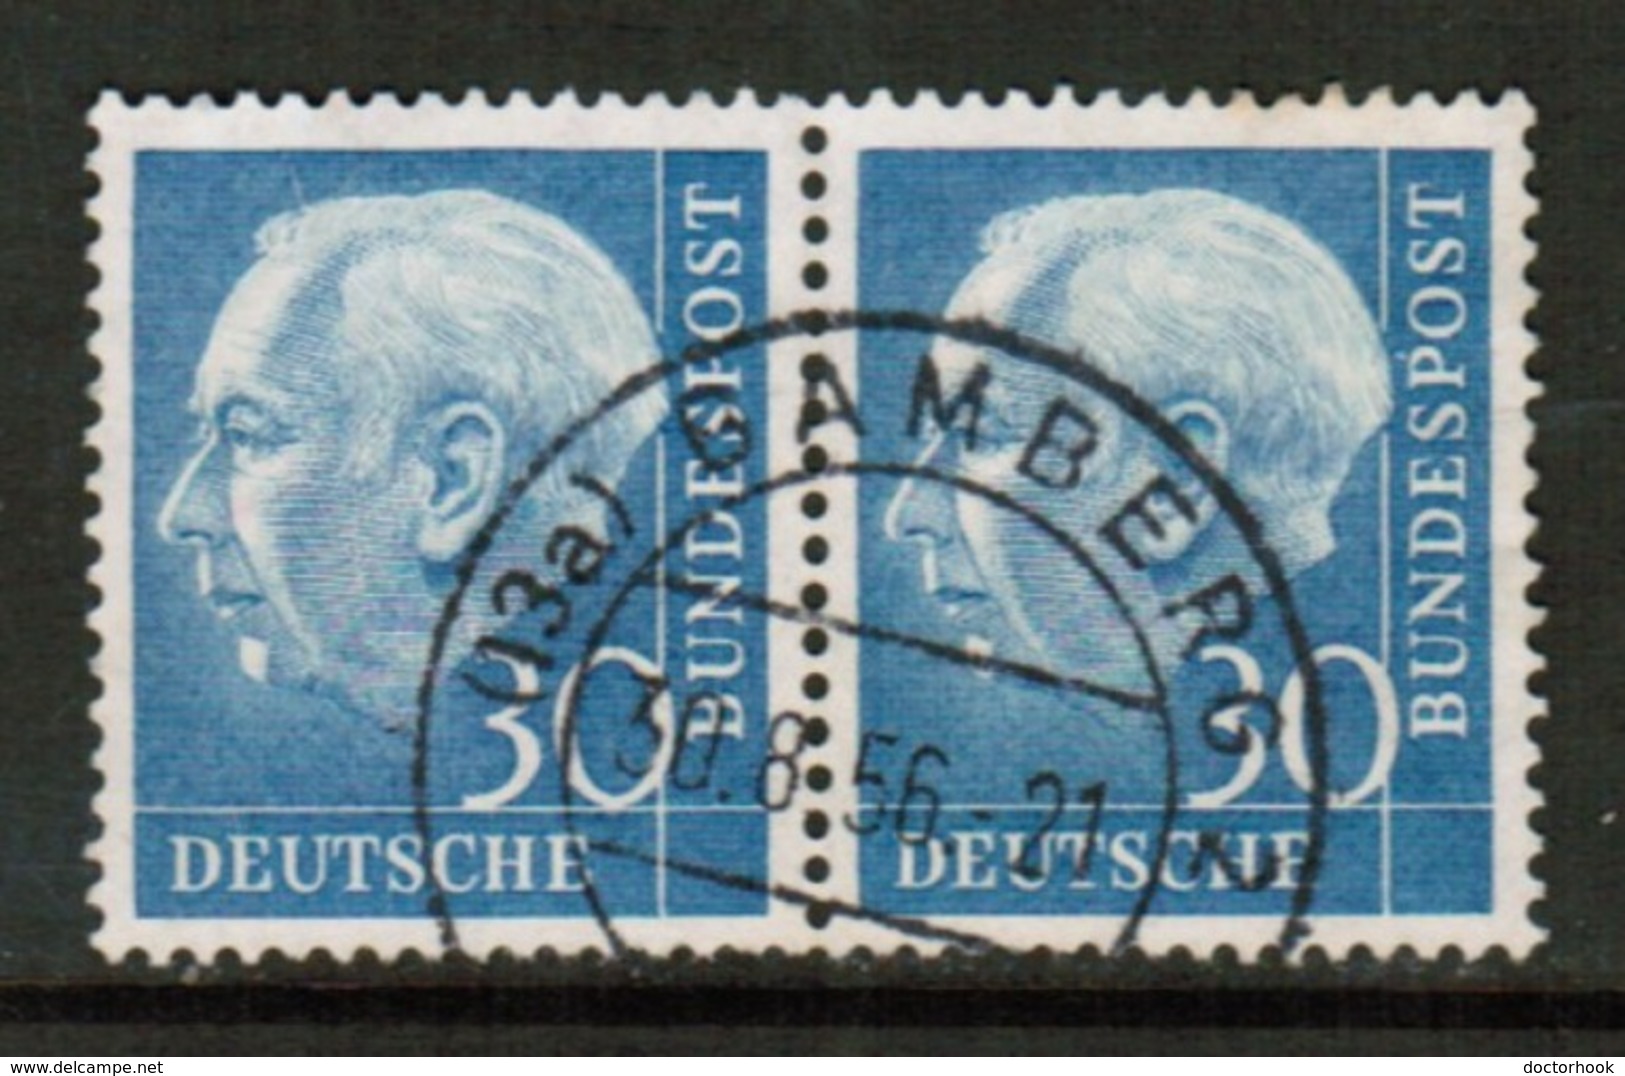 GERMANY  Scott # 712 VF USED PAIR (Stamp Scan # 453) - Used Stamps